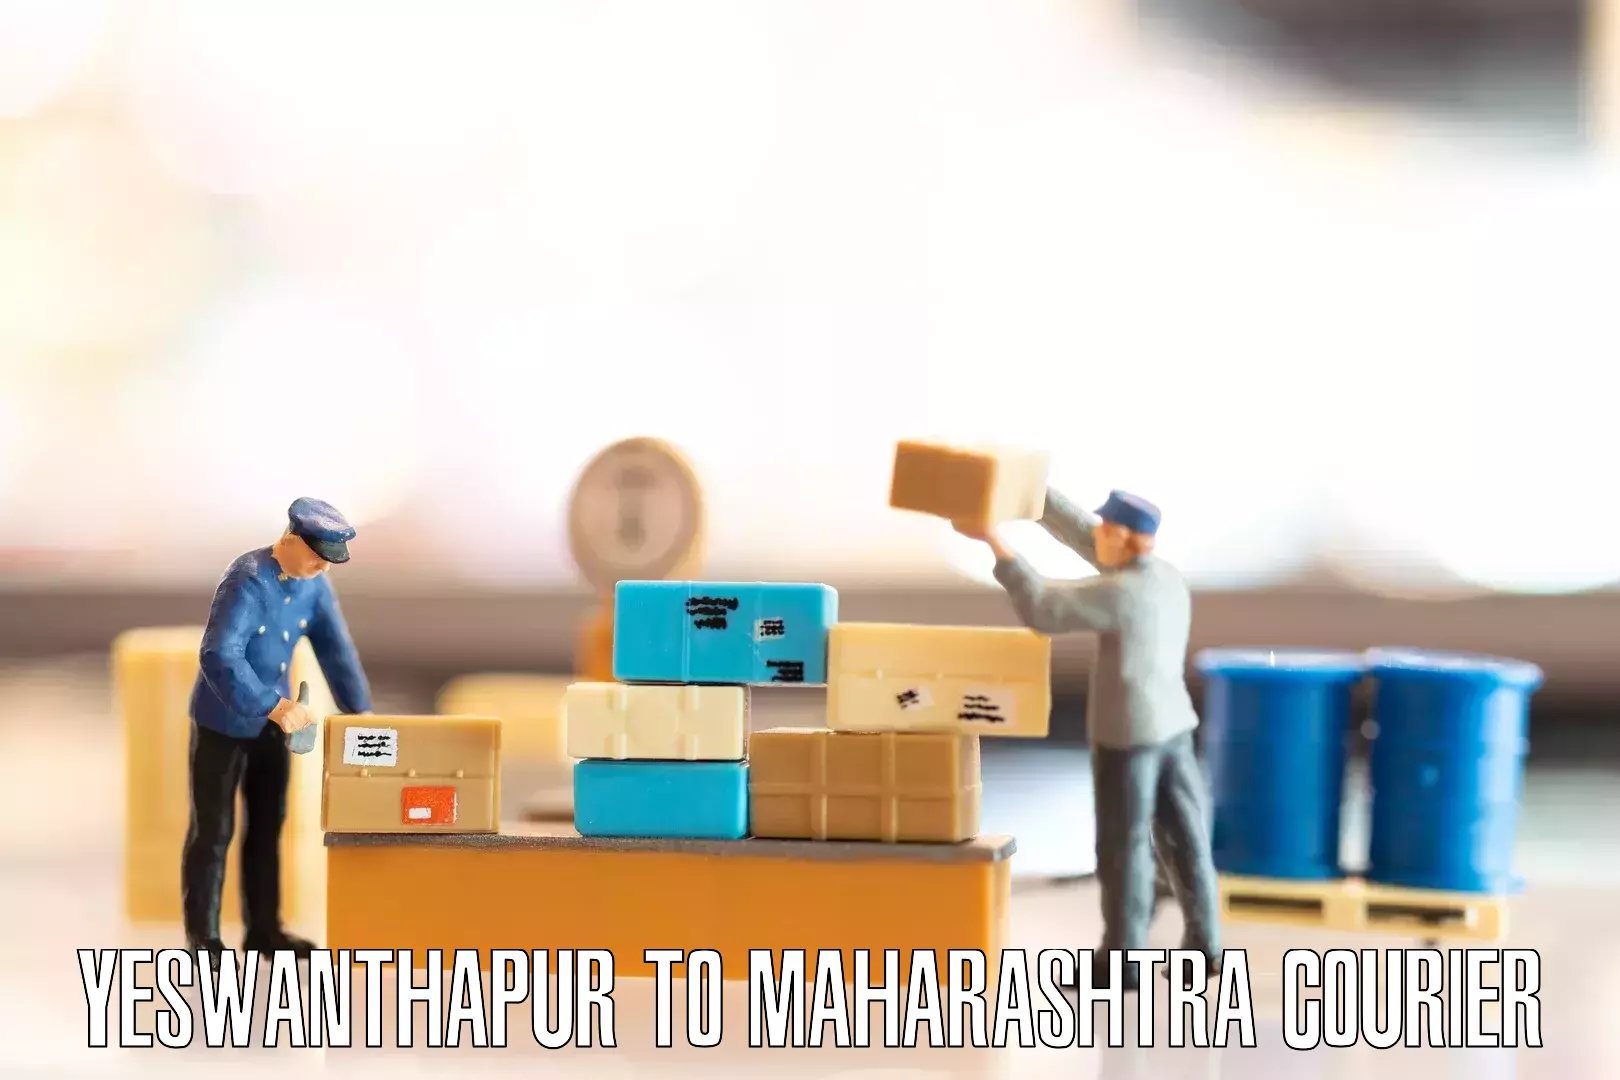 Furniture delivery service Yeswanthapur to Yavatmal